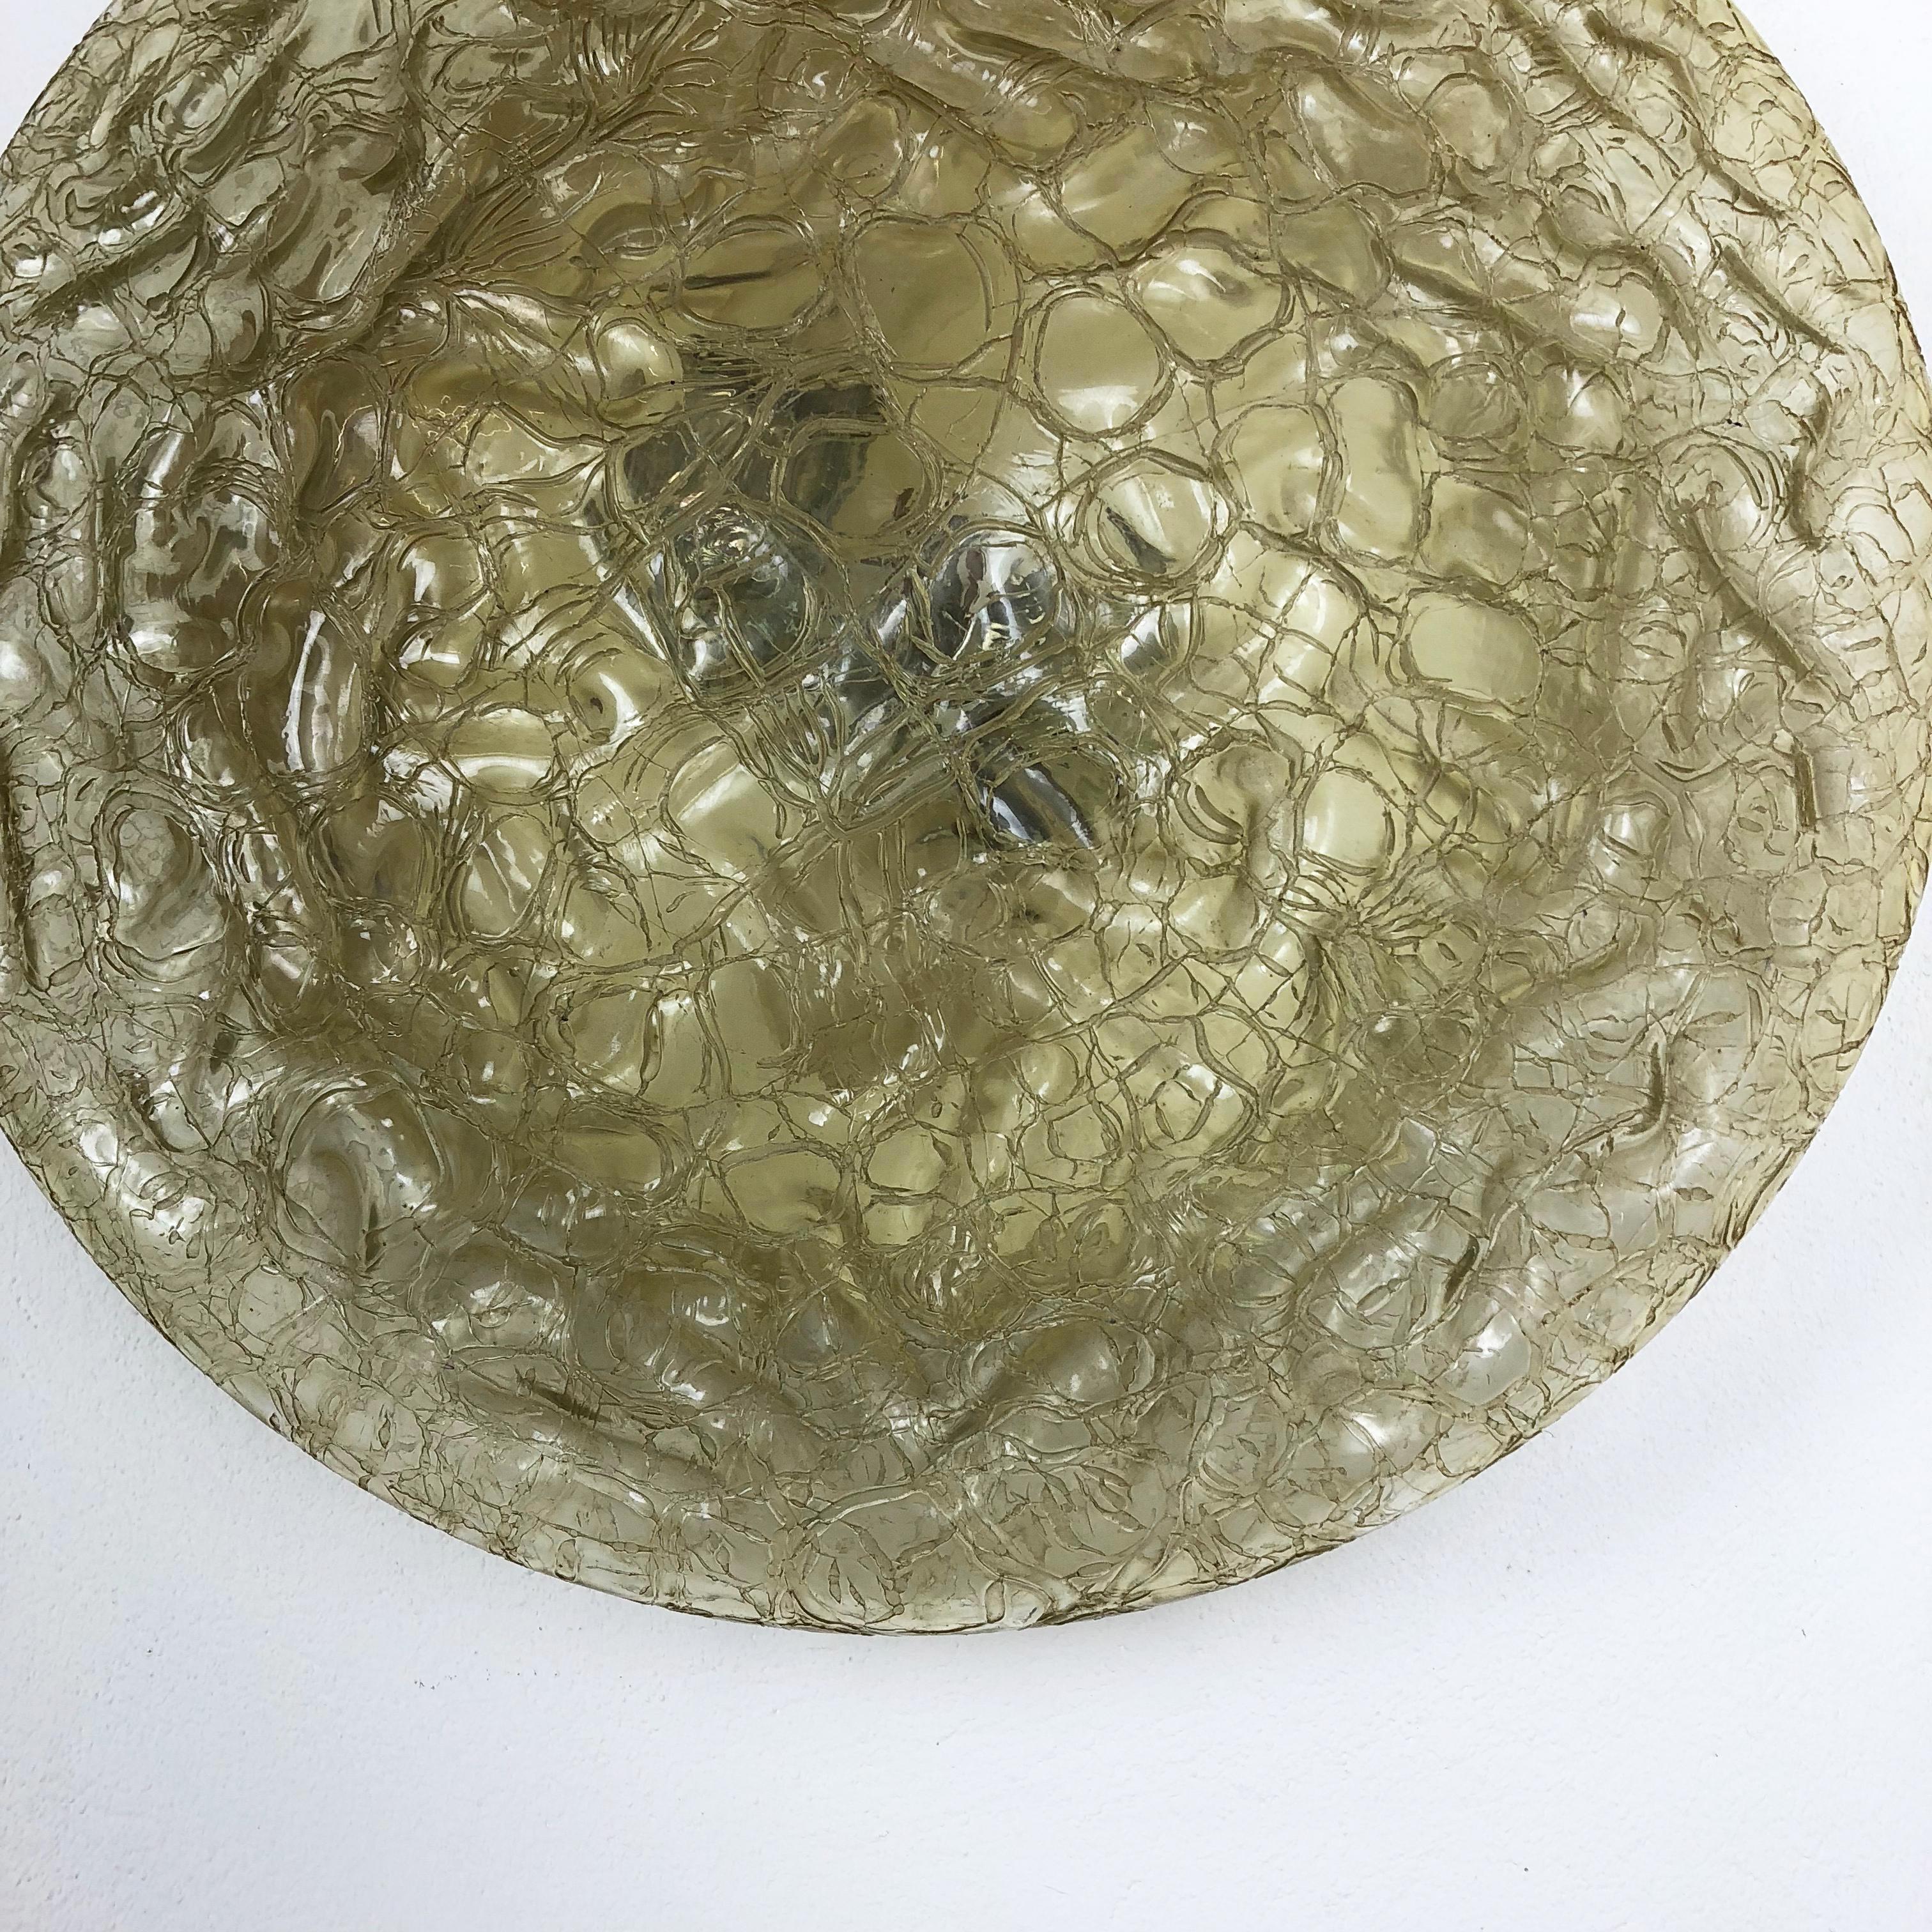 Metal Modernist Glass and metal wall Light by Doria Lights, 1970s, Germany For Sale